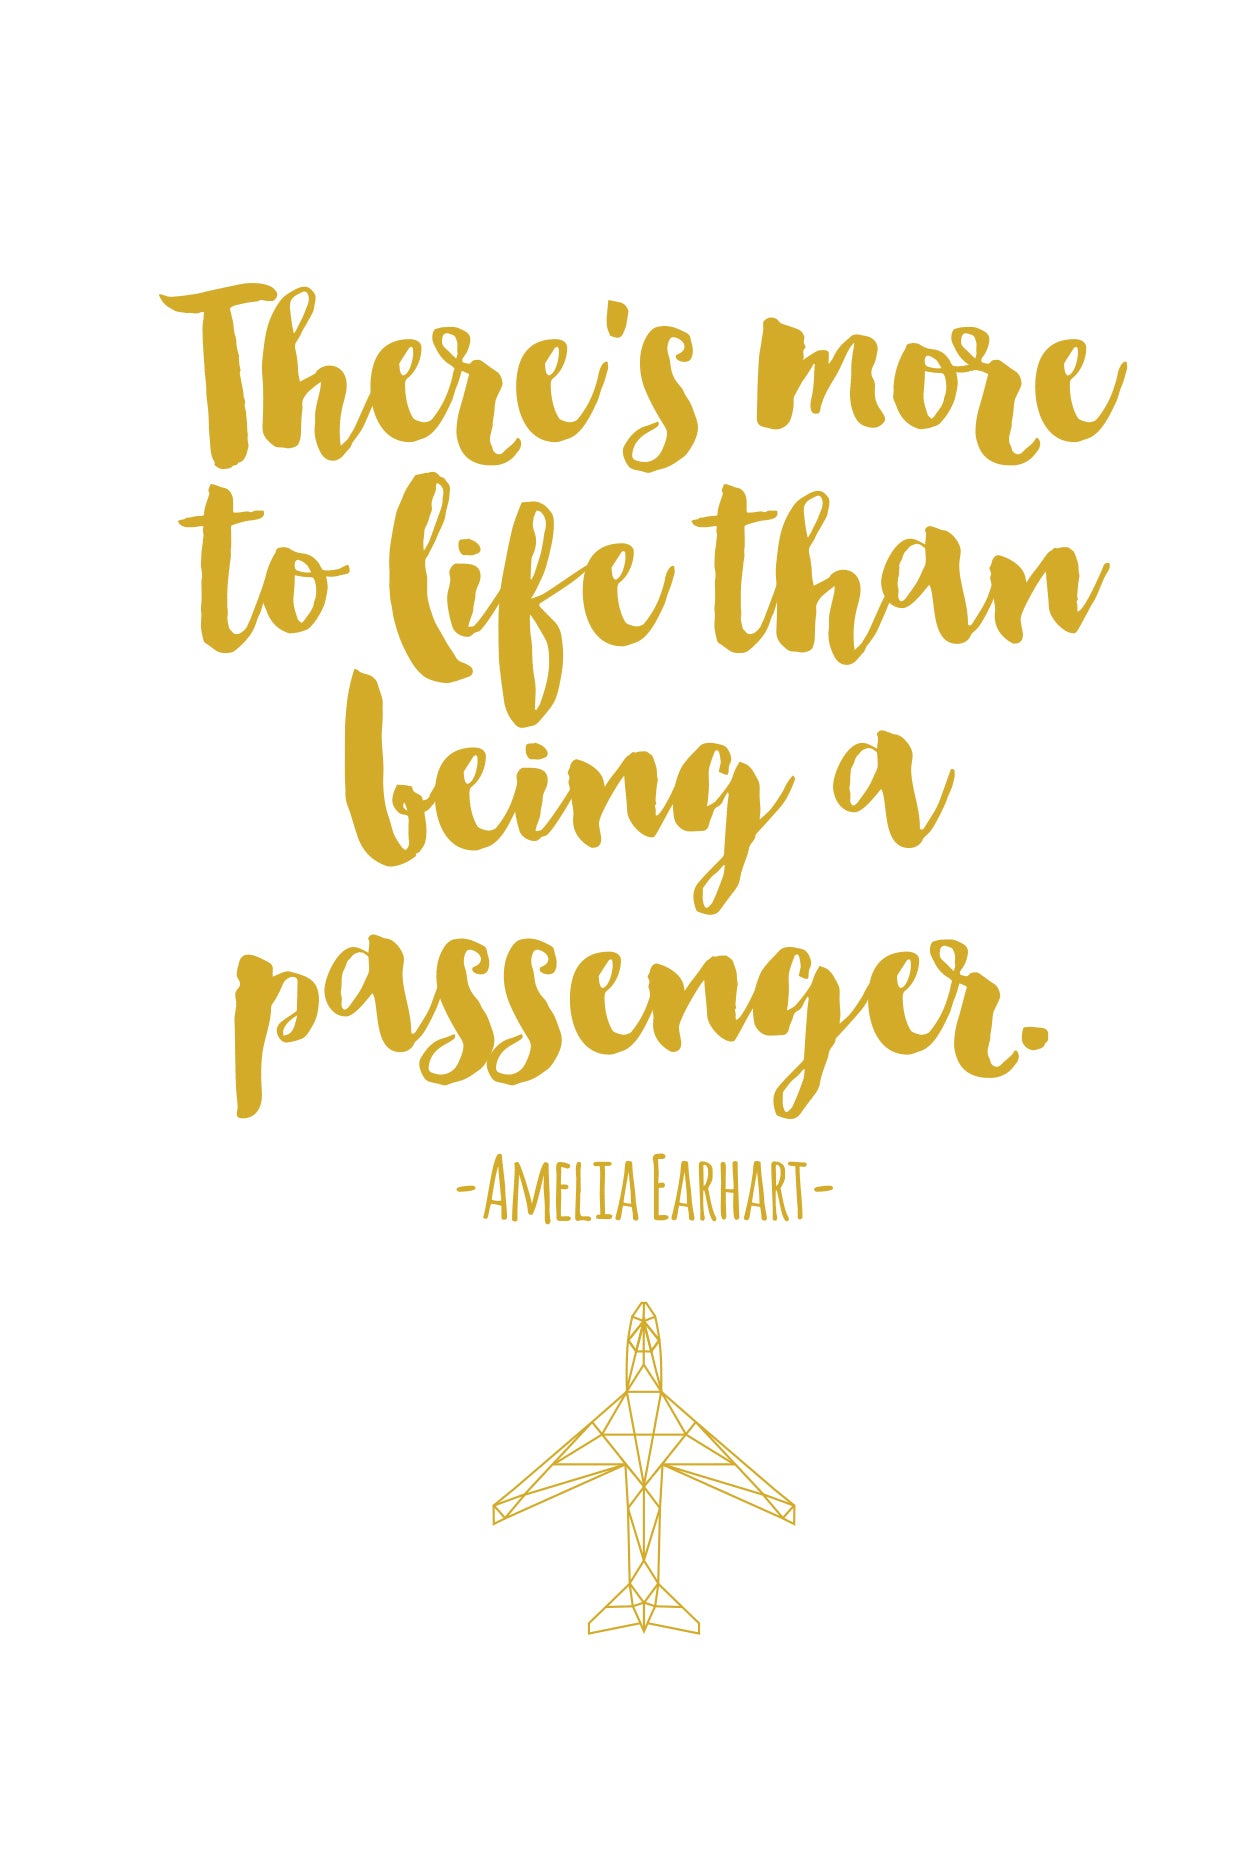 Amelia Earhart quote with yellow font and her quote saying "There is more to life than being a passenger." Yellow geometric aircraft at the bottom.